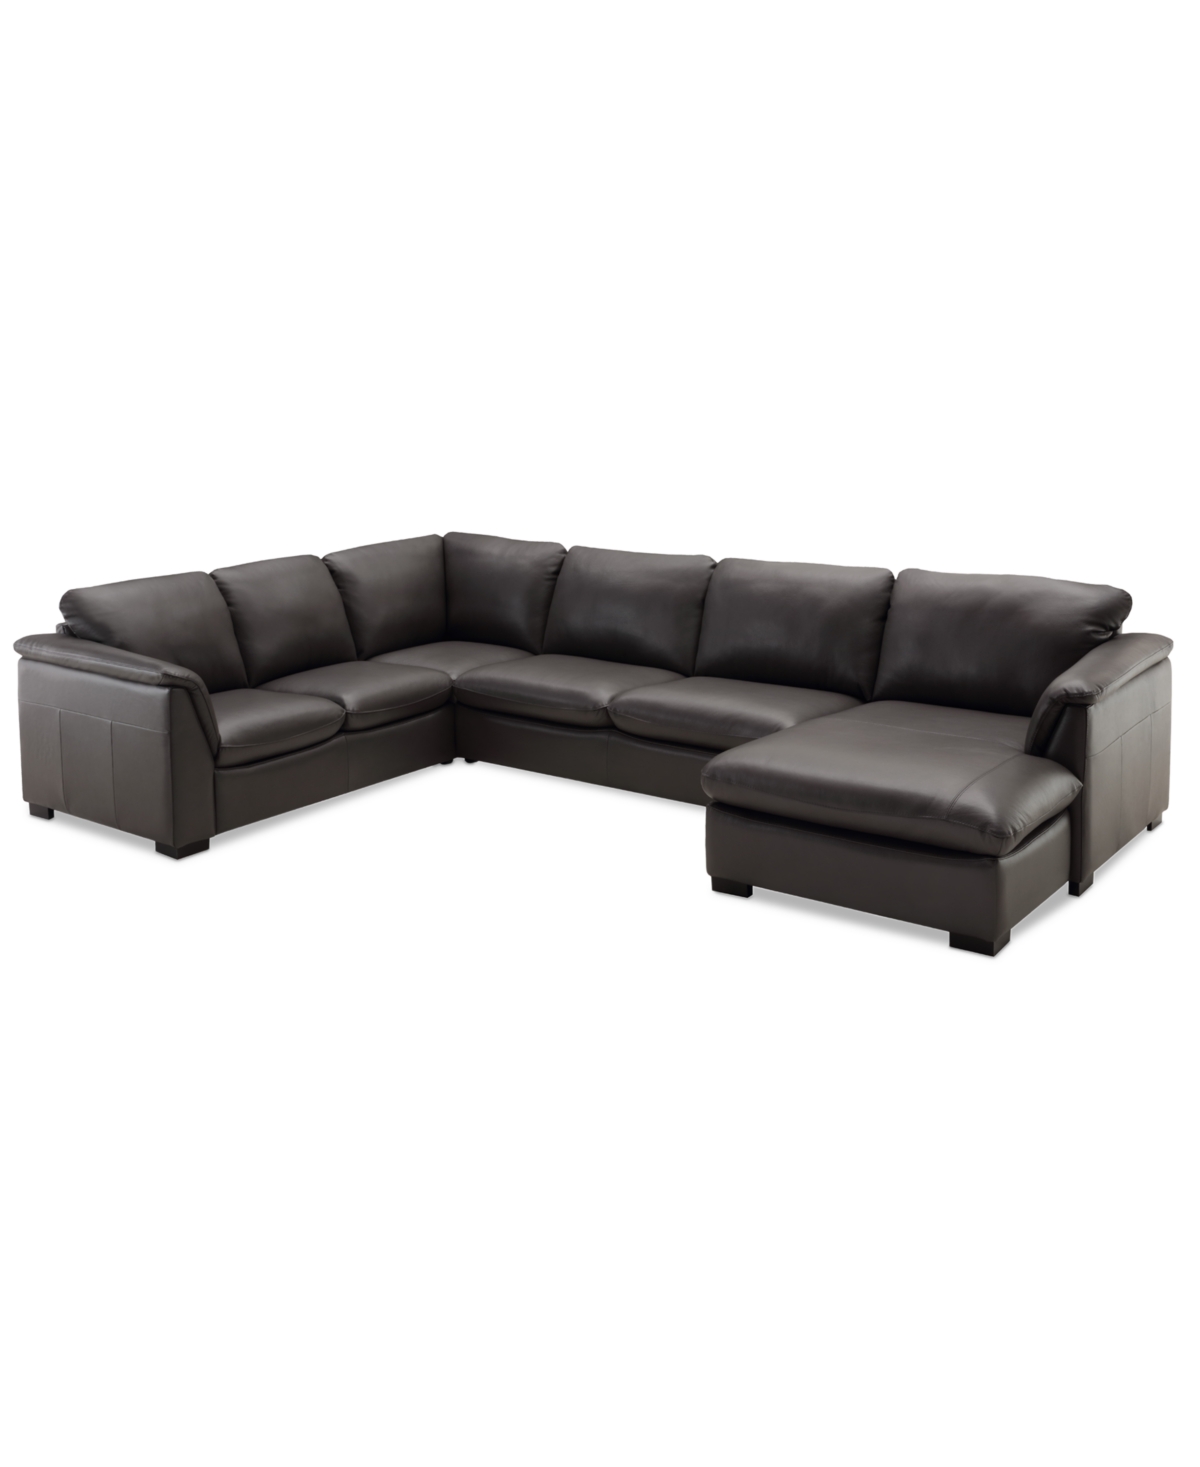 Furniture Arond 144" 3-pc. Leather Sectional With Chaise, Created For Macy's In Charcoal